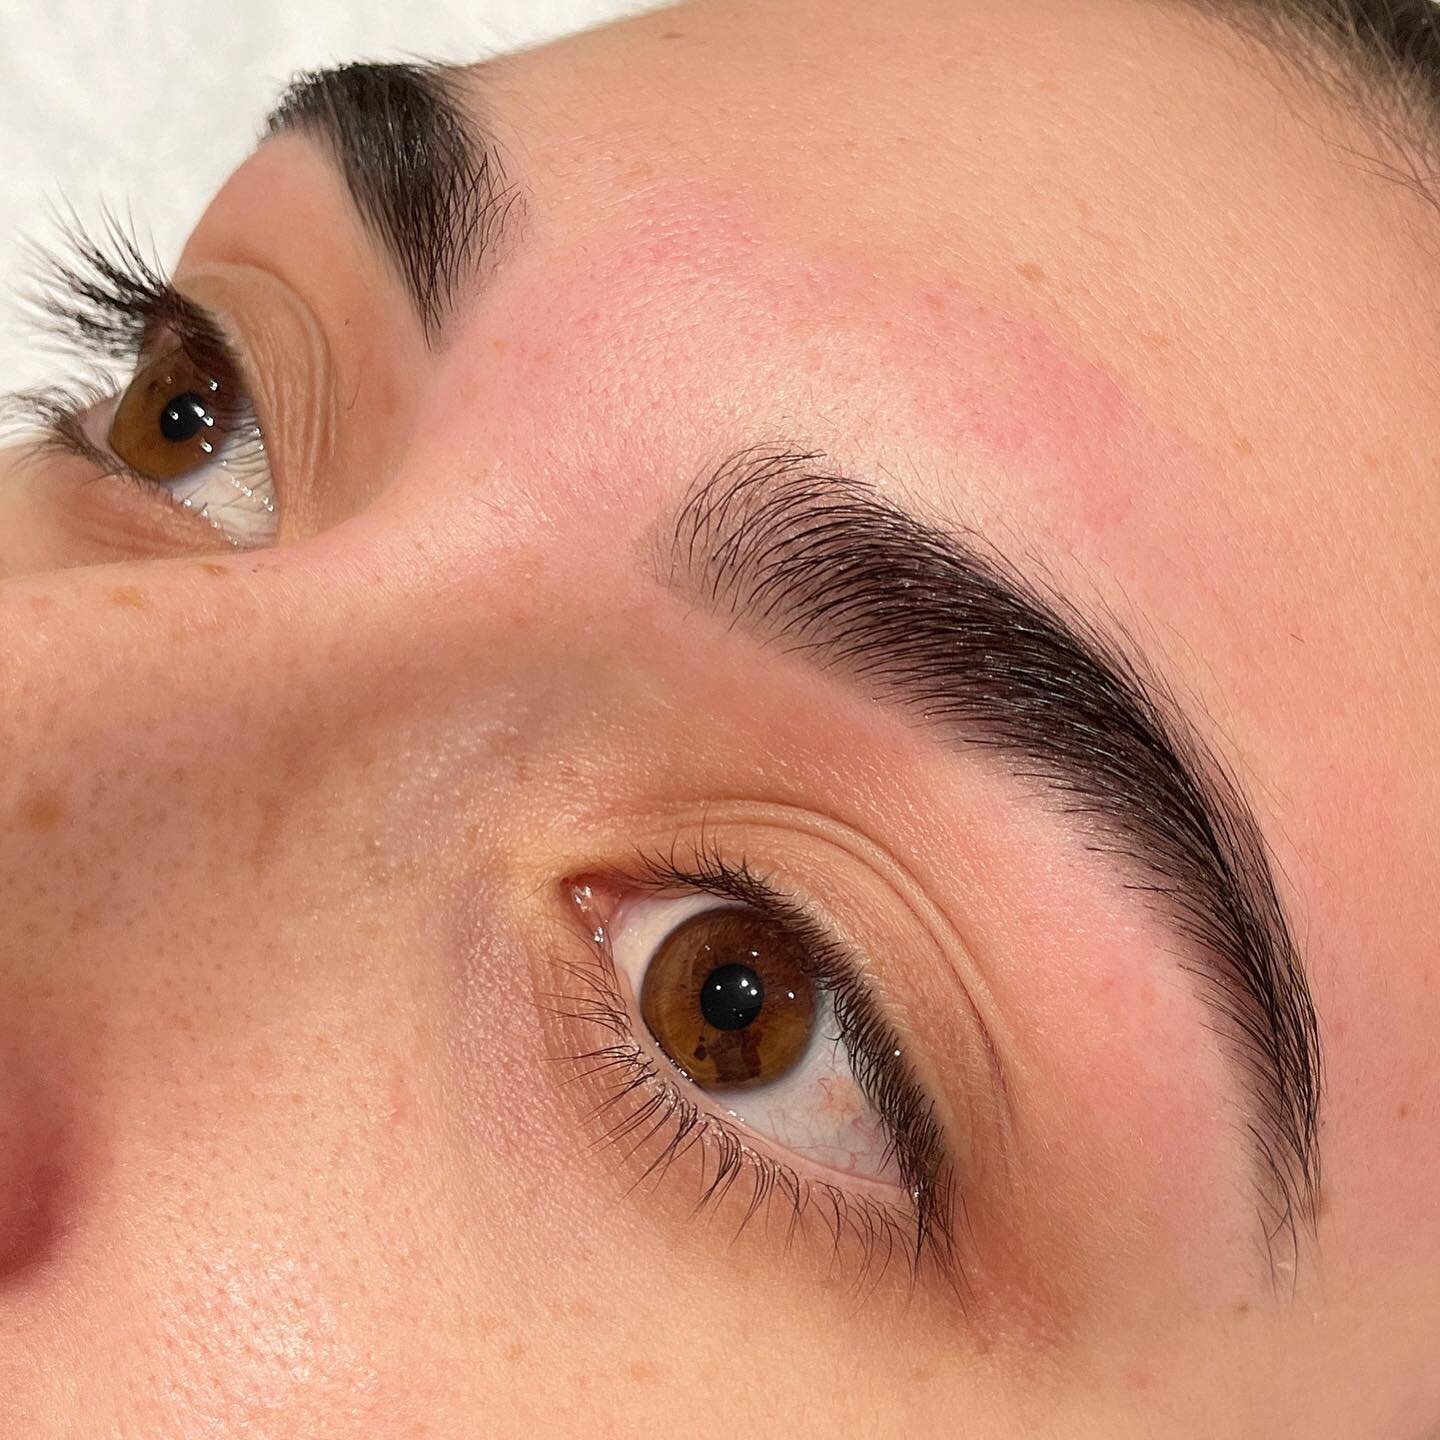 Fresh brows 👏🏽👏🏽
Treatment || Brow Wax and Tint 
Book your brow makeover today!
Bookings available online via our website or contact us directly on 9339 4169. 
.
#perthlashandbrows #perthbeautysalon #perthbeauty #perthbrowstylist #perthbrowshapin